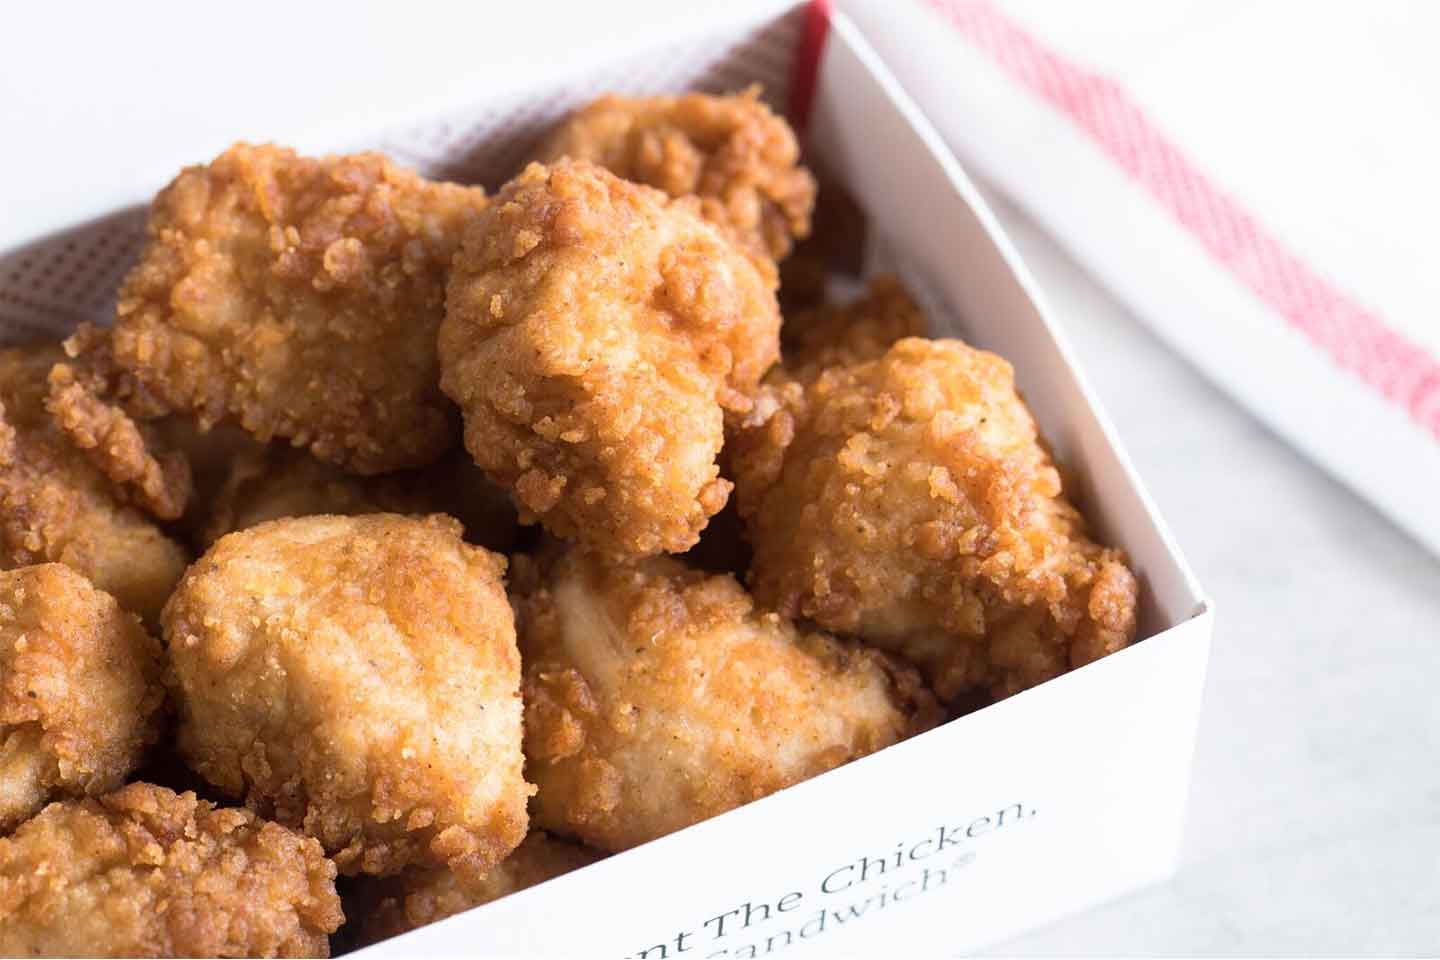 chick fil a 8 count nugget meal calories